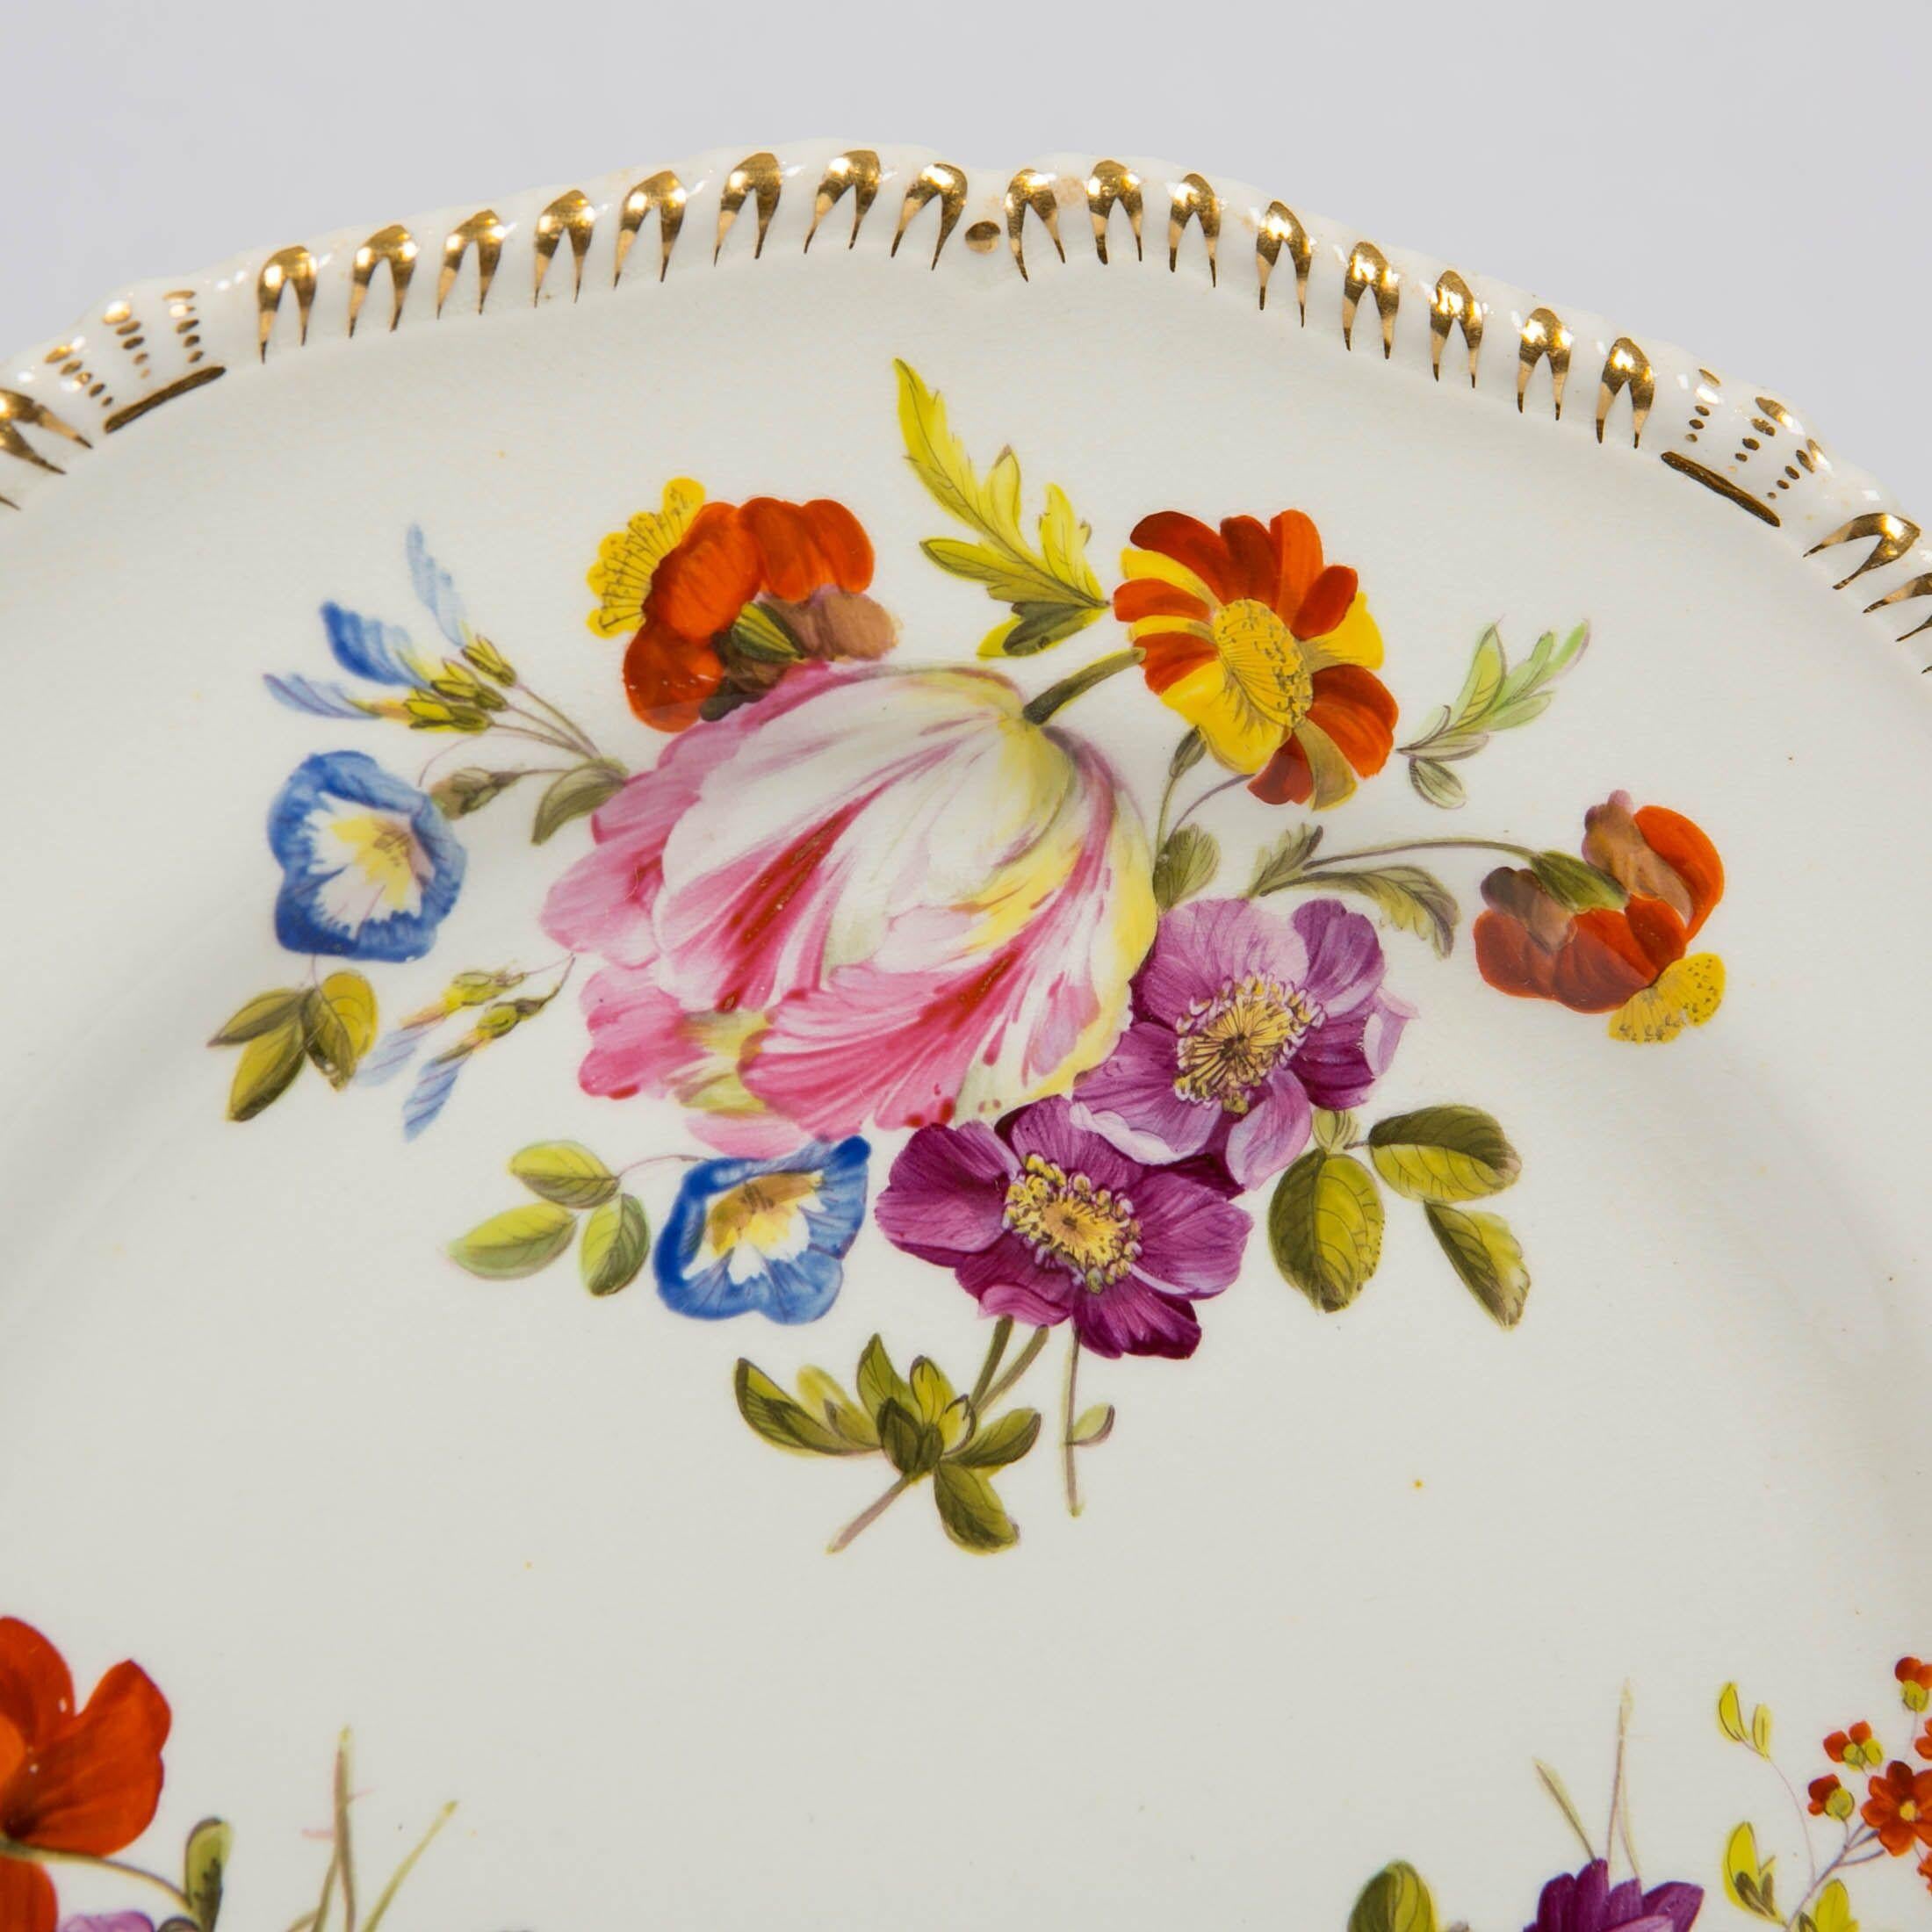 This pair of Derby porcelain plates was hand painted, showing beautiful summer flowers in bright polychrome enamels. They were painted by eminent Derby flower painter Leonard Lead circa 1825. He used an exceptionally bright palette of pinks and